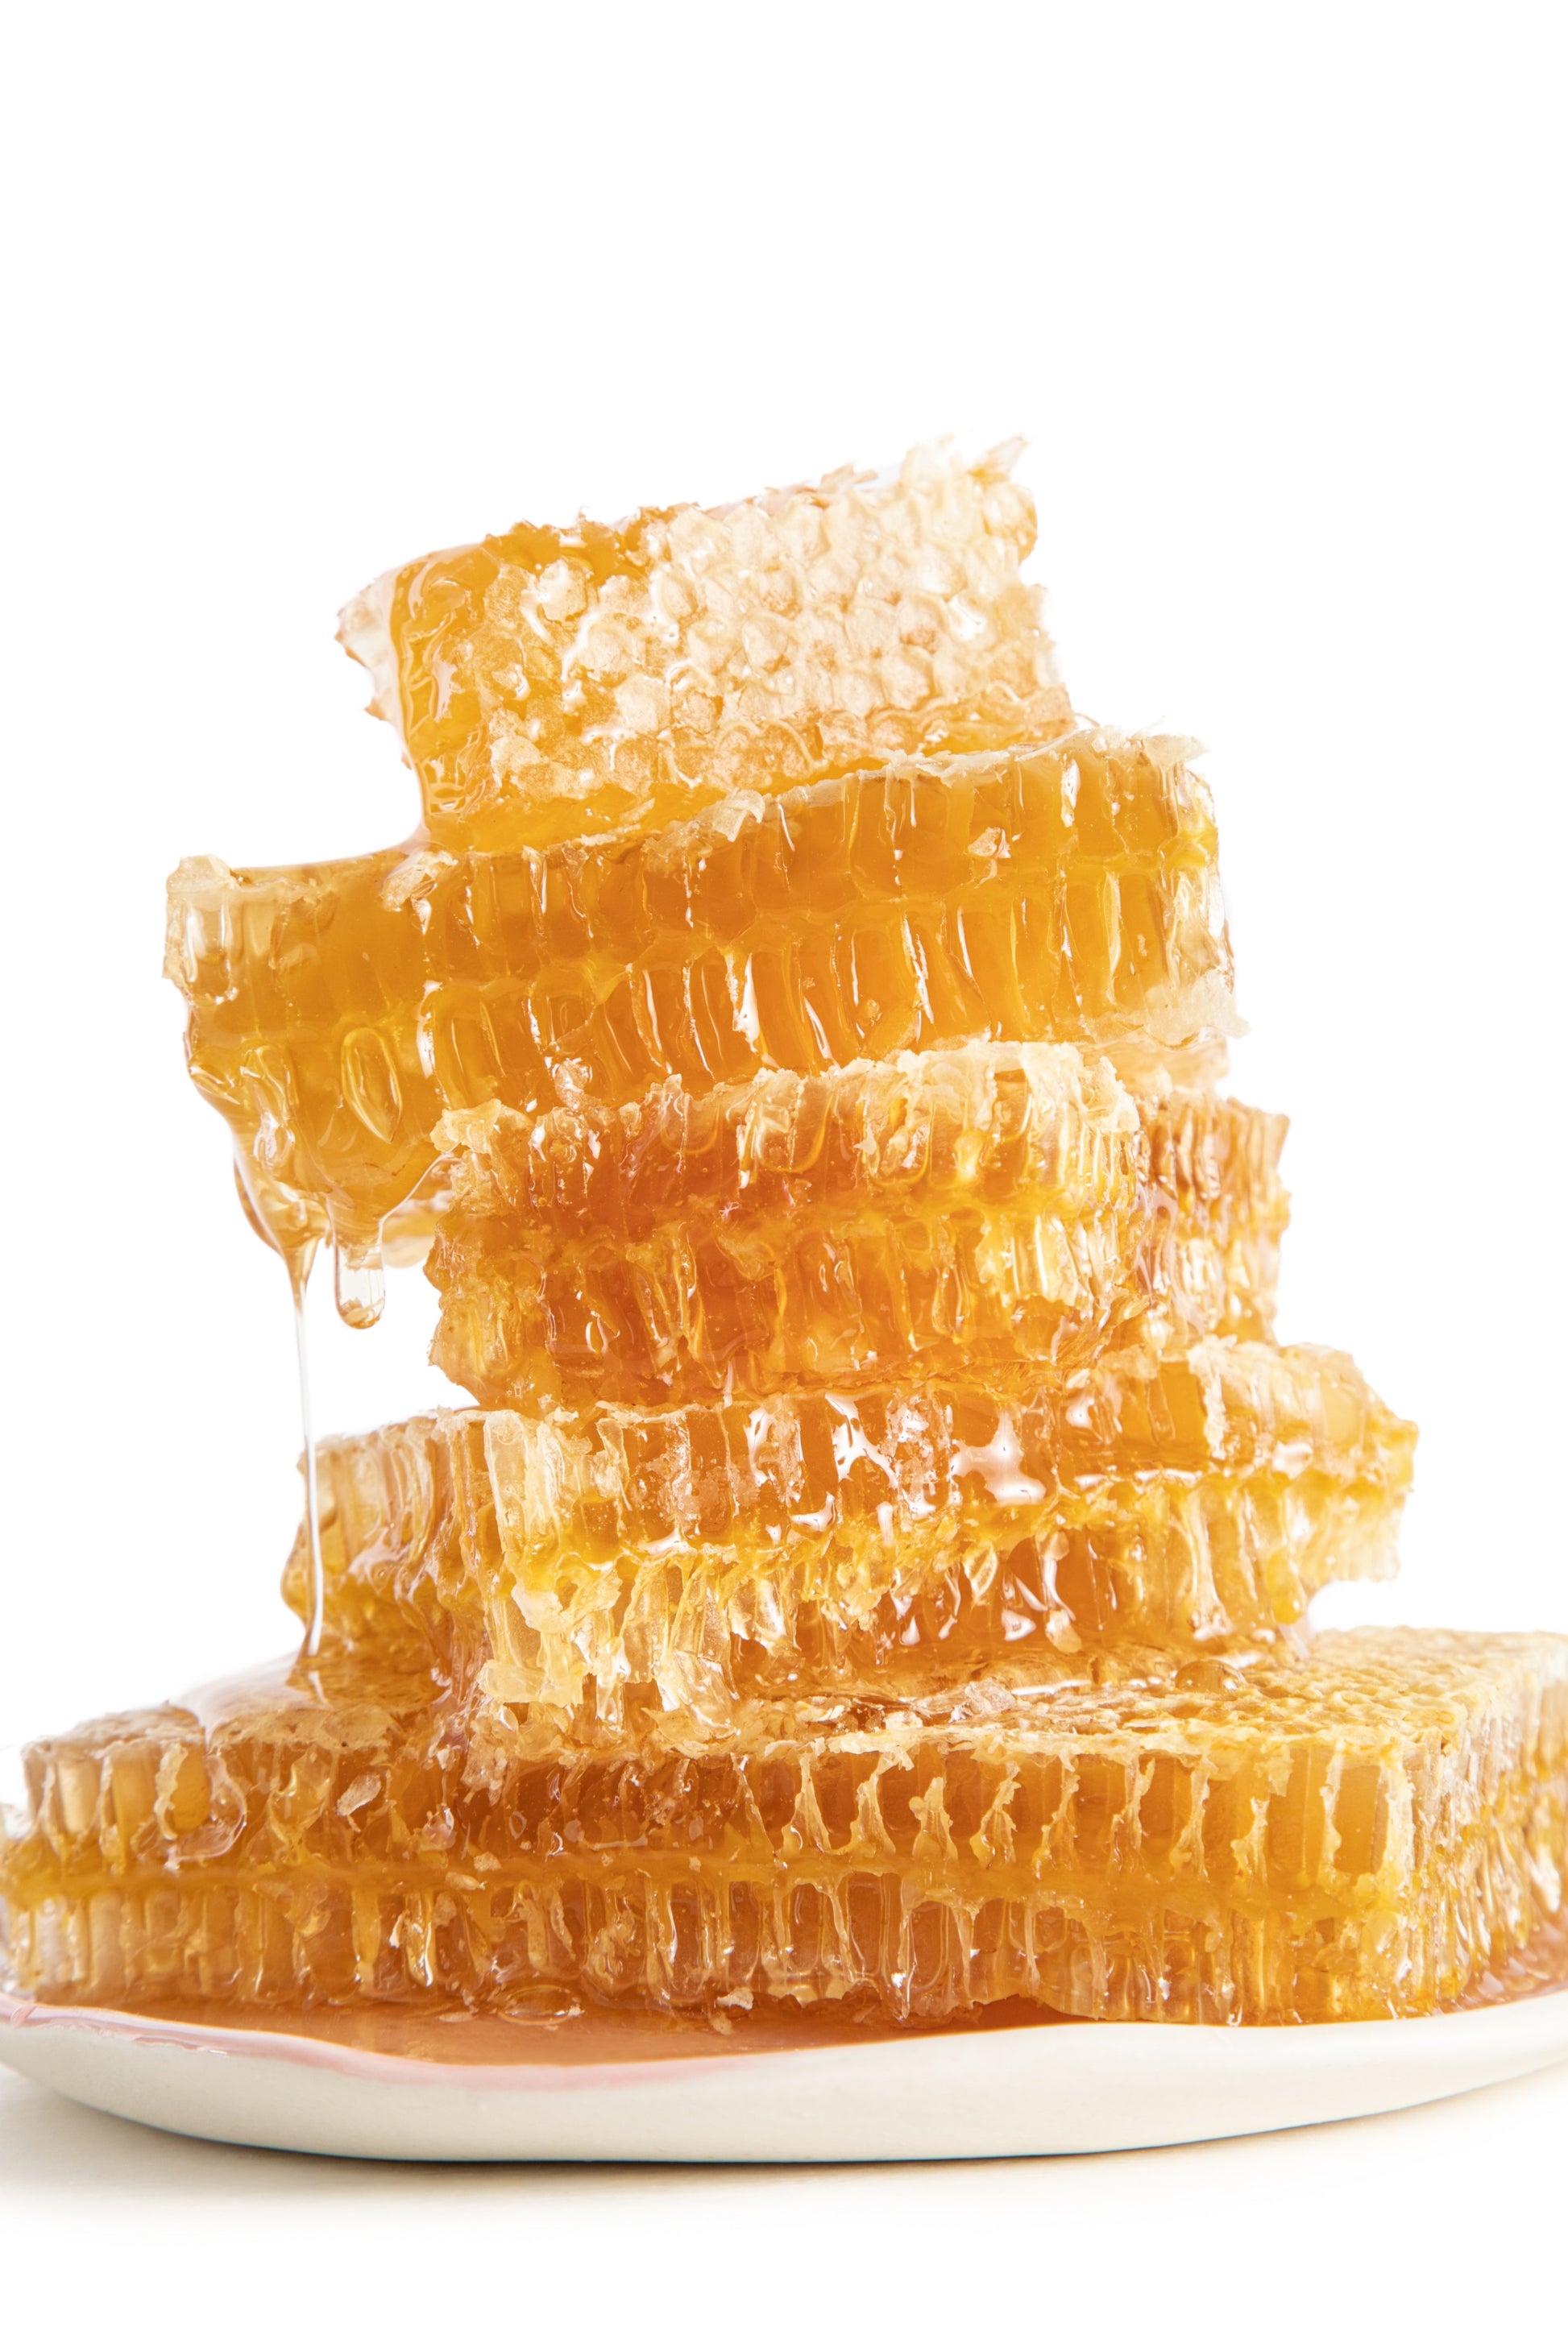 Raw Honeycomb Stacked close up.